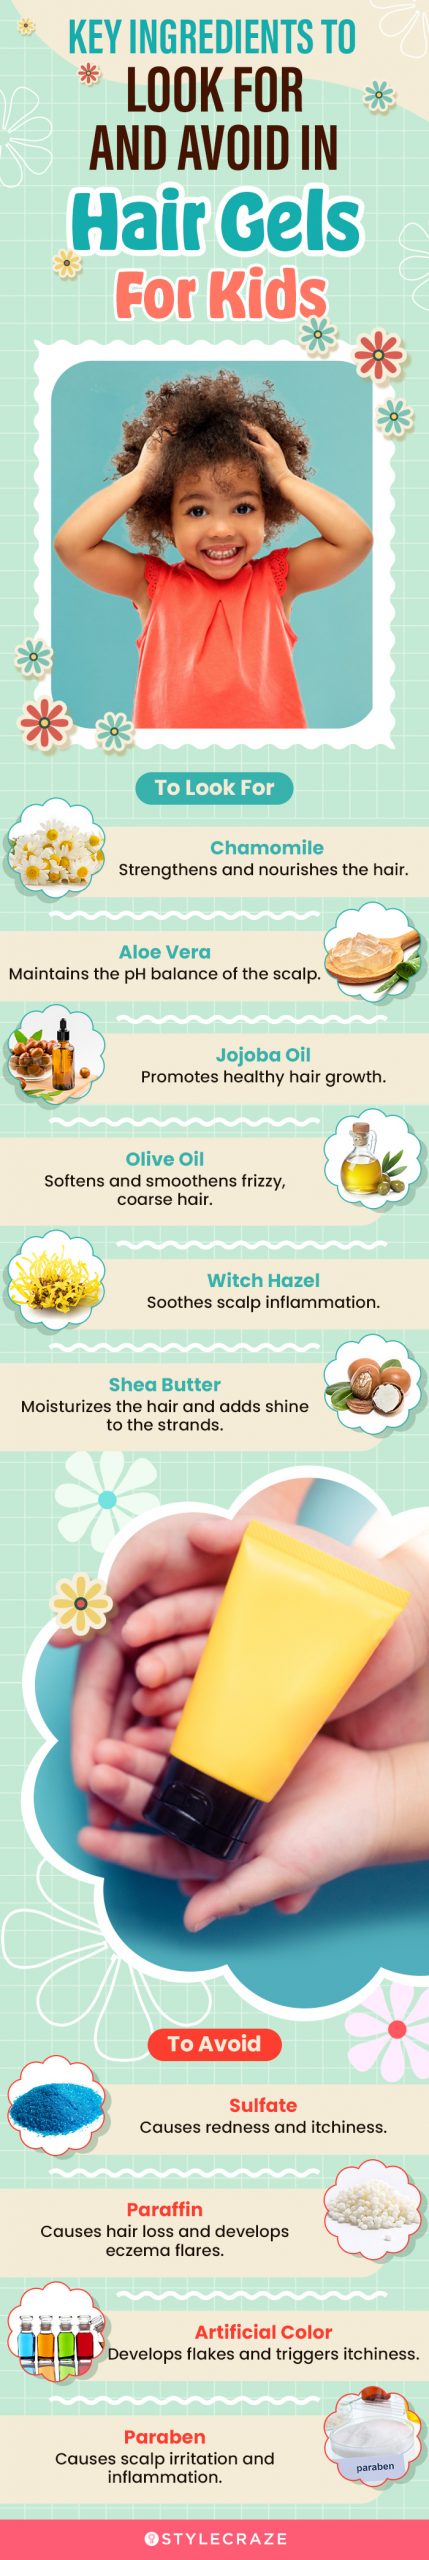 Key Ingredients To Look For And Avoid In Hair Gels For Kids (infographic)